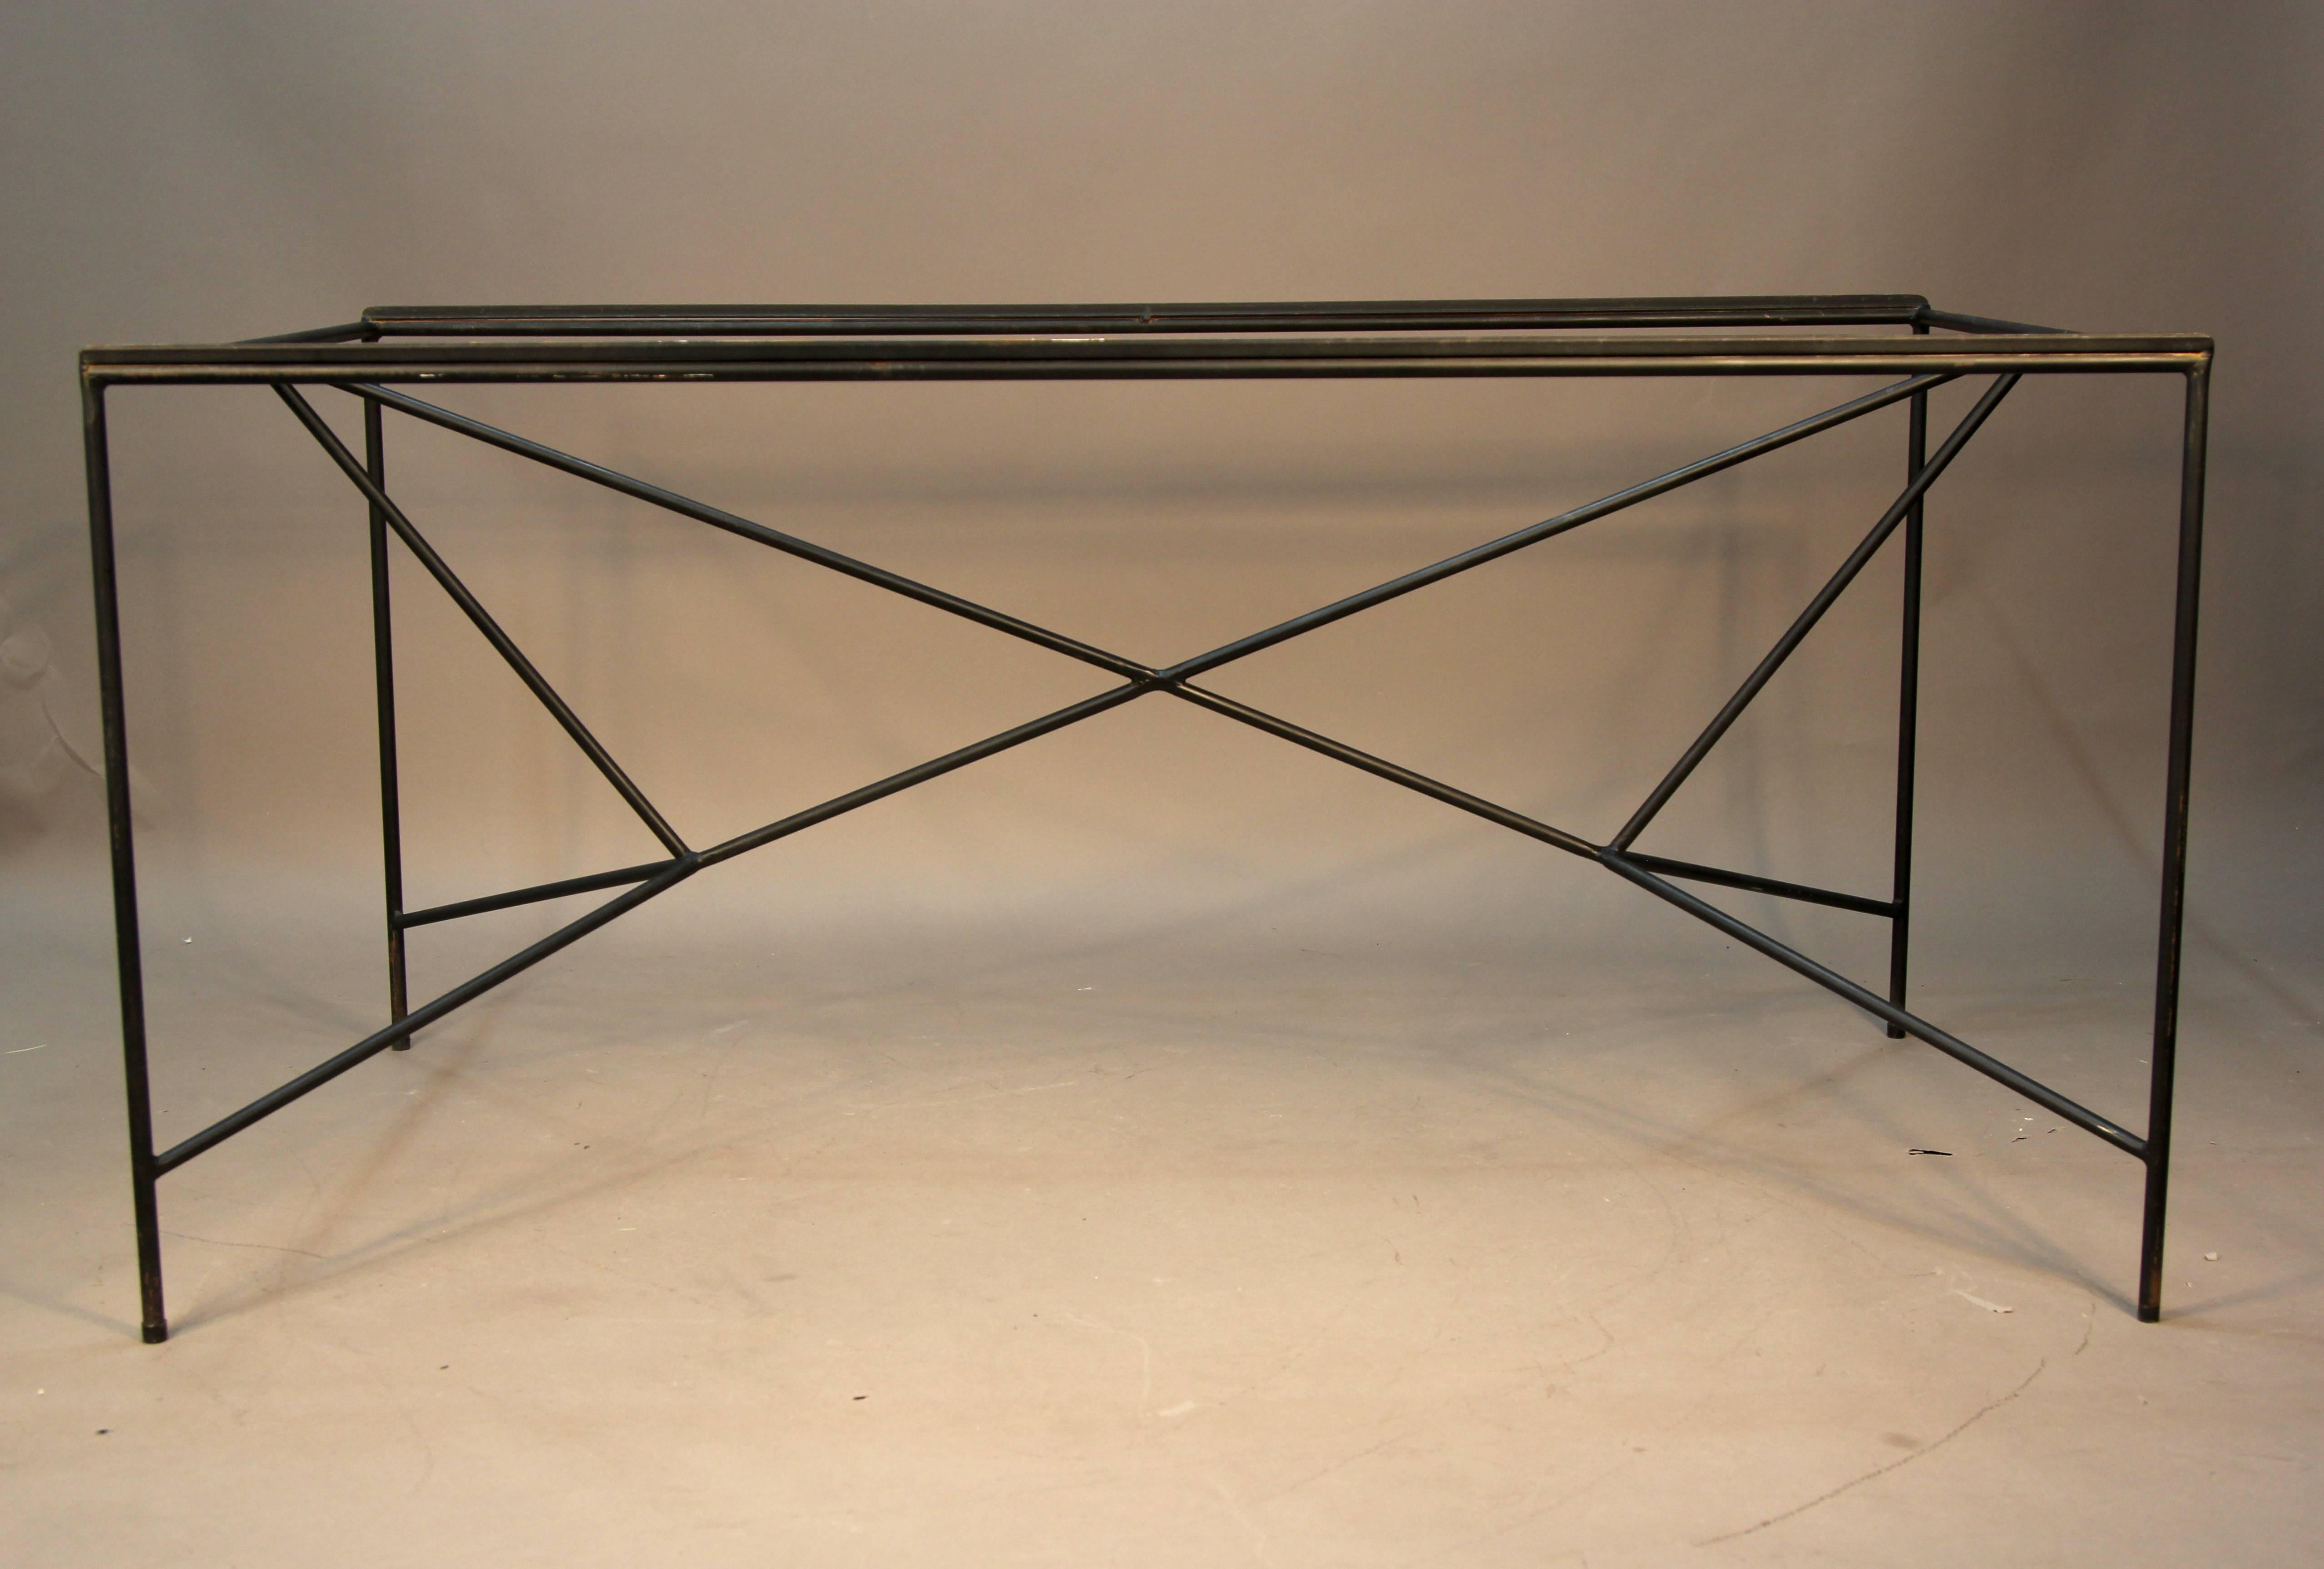 Very rare Paul McCobb iron base dining table or desk. Welded iron triangular shapes make up this linear base with inset glass top.